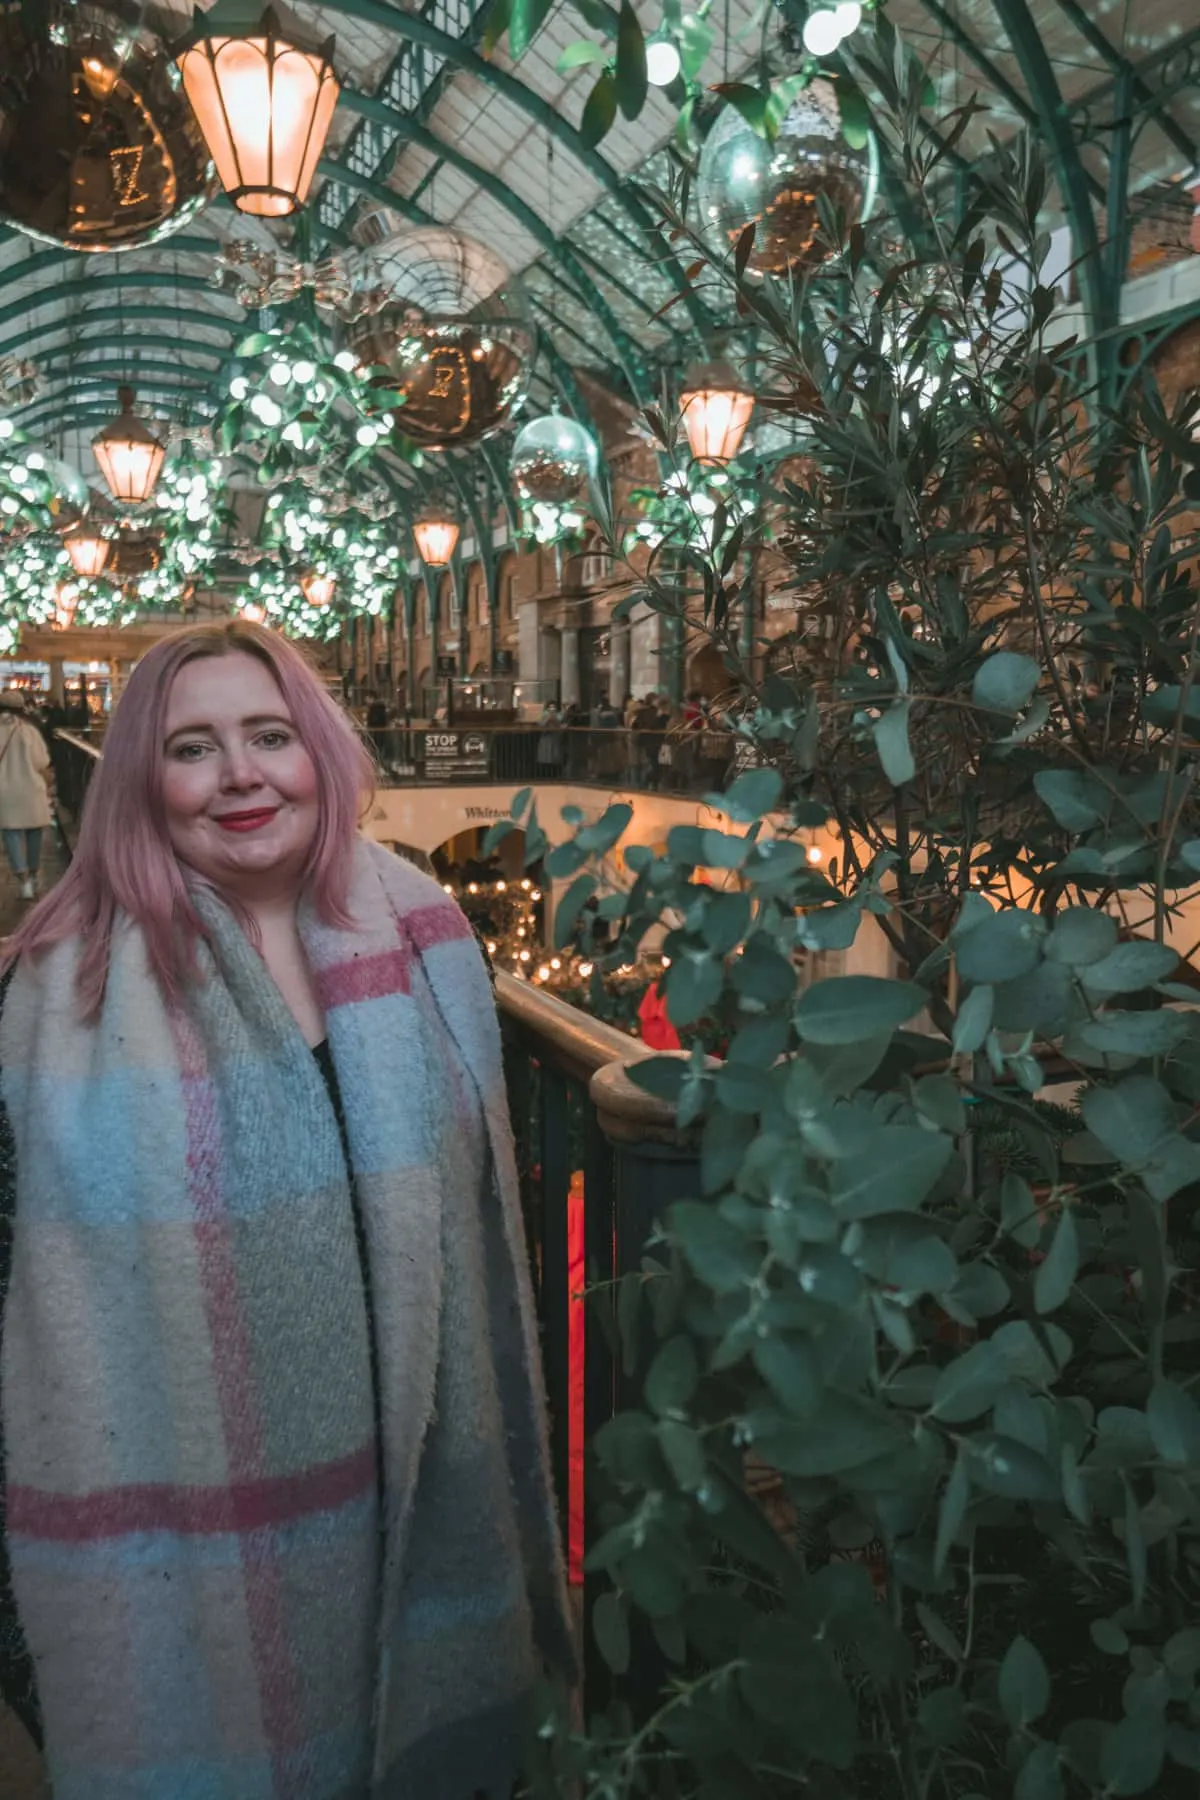 Kat standing in front of the Christmas lights in Covent Garden